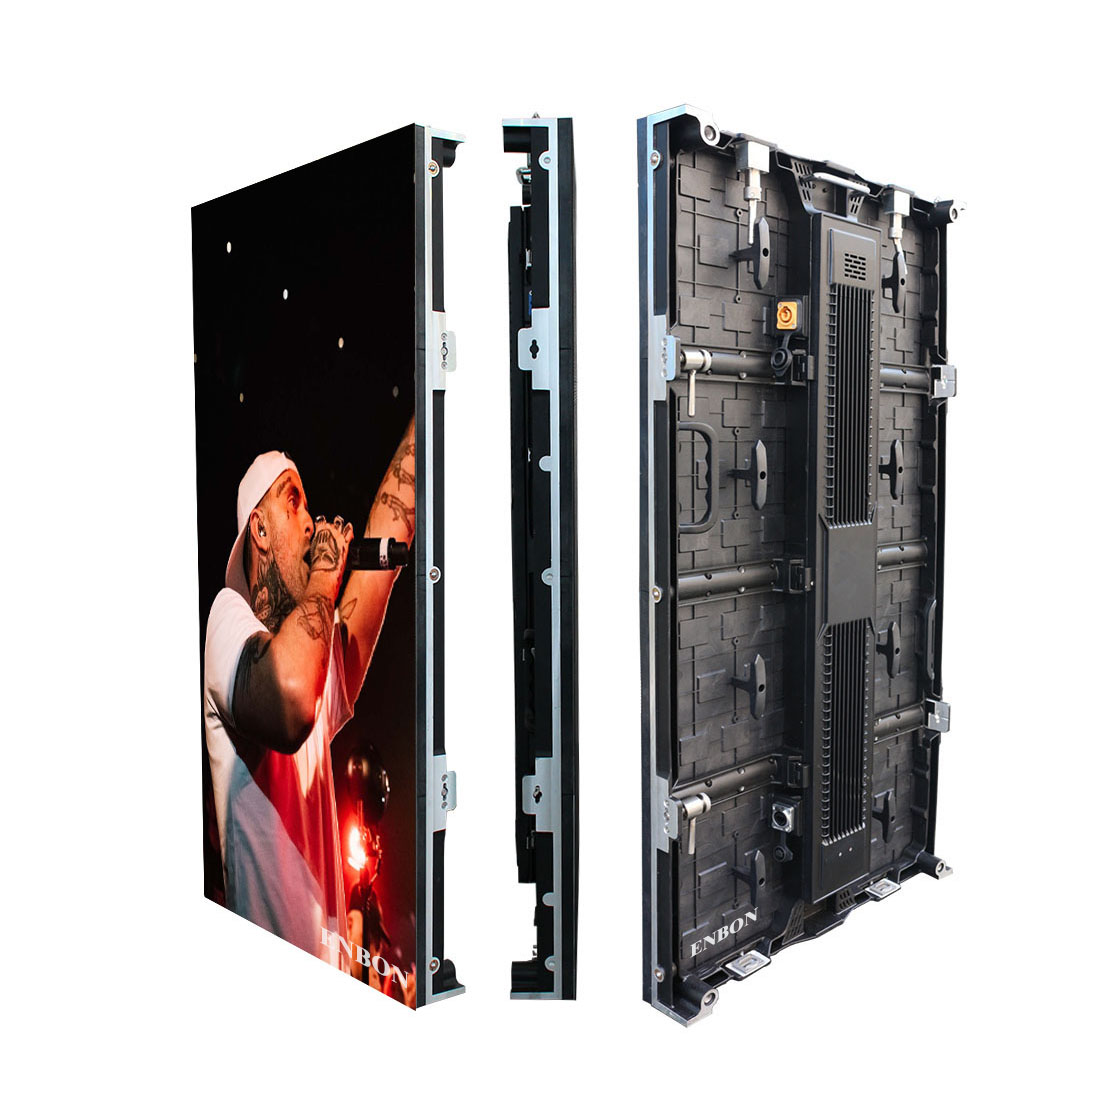 P5.95 High Brightness Outdoor Movable Led Video Screen for Events ( 500*500mm, 500*1000mm)